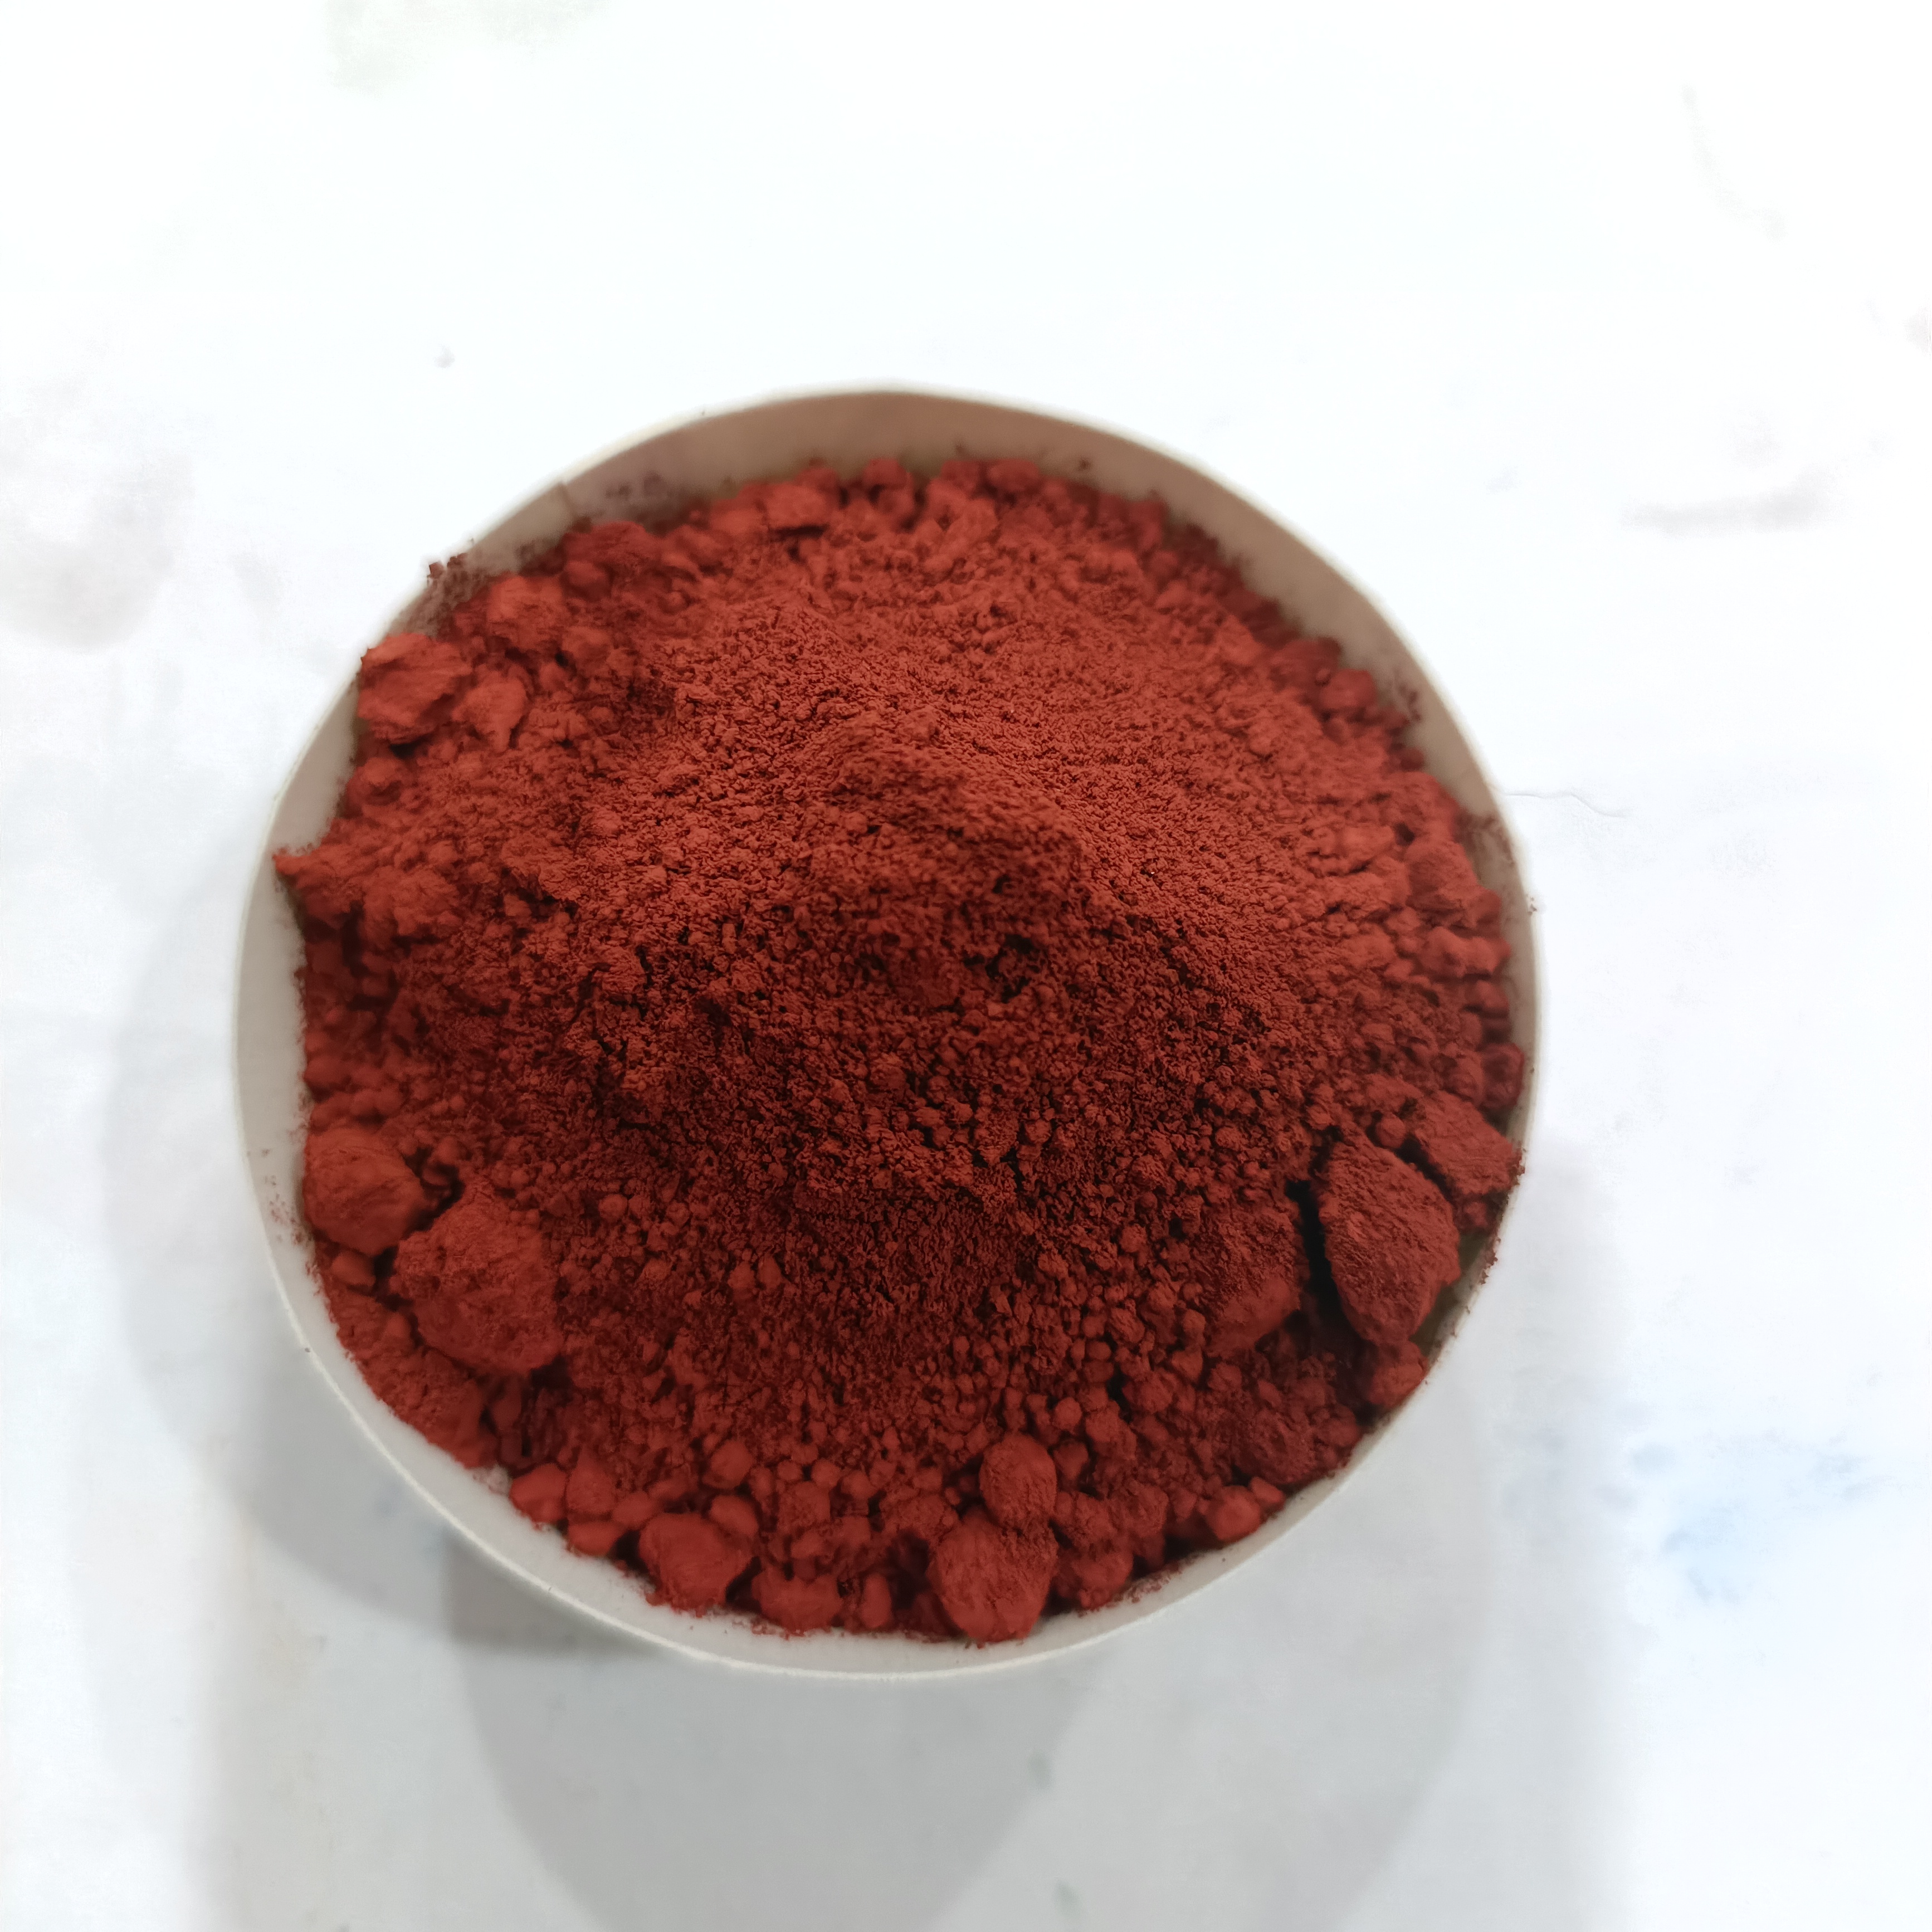 Factors that cause different colors of iron oxide pigments